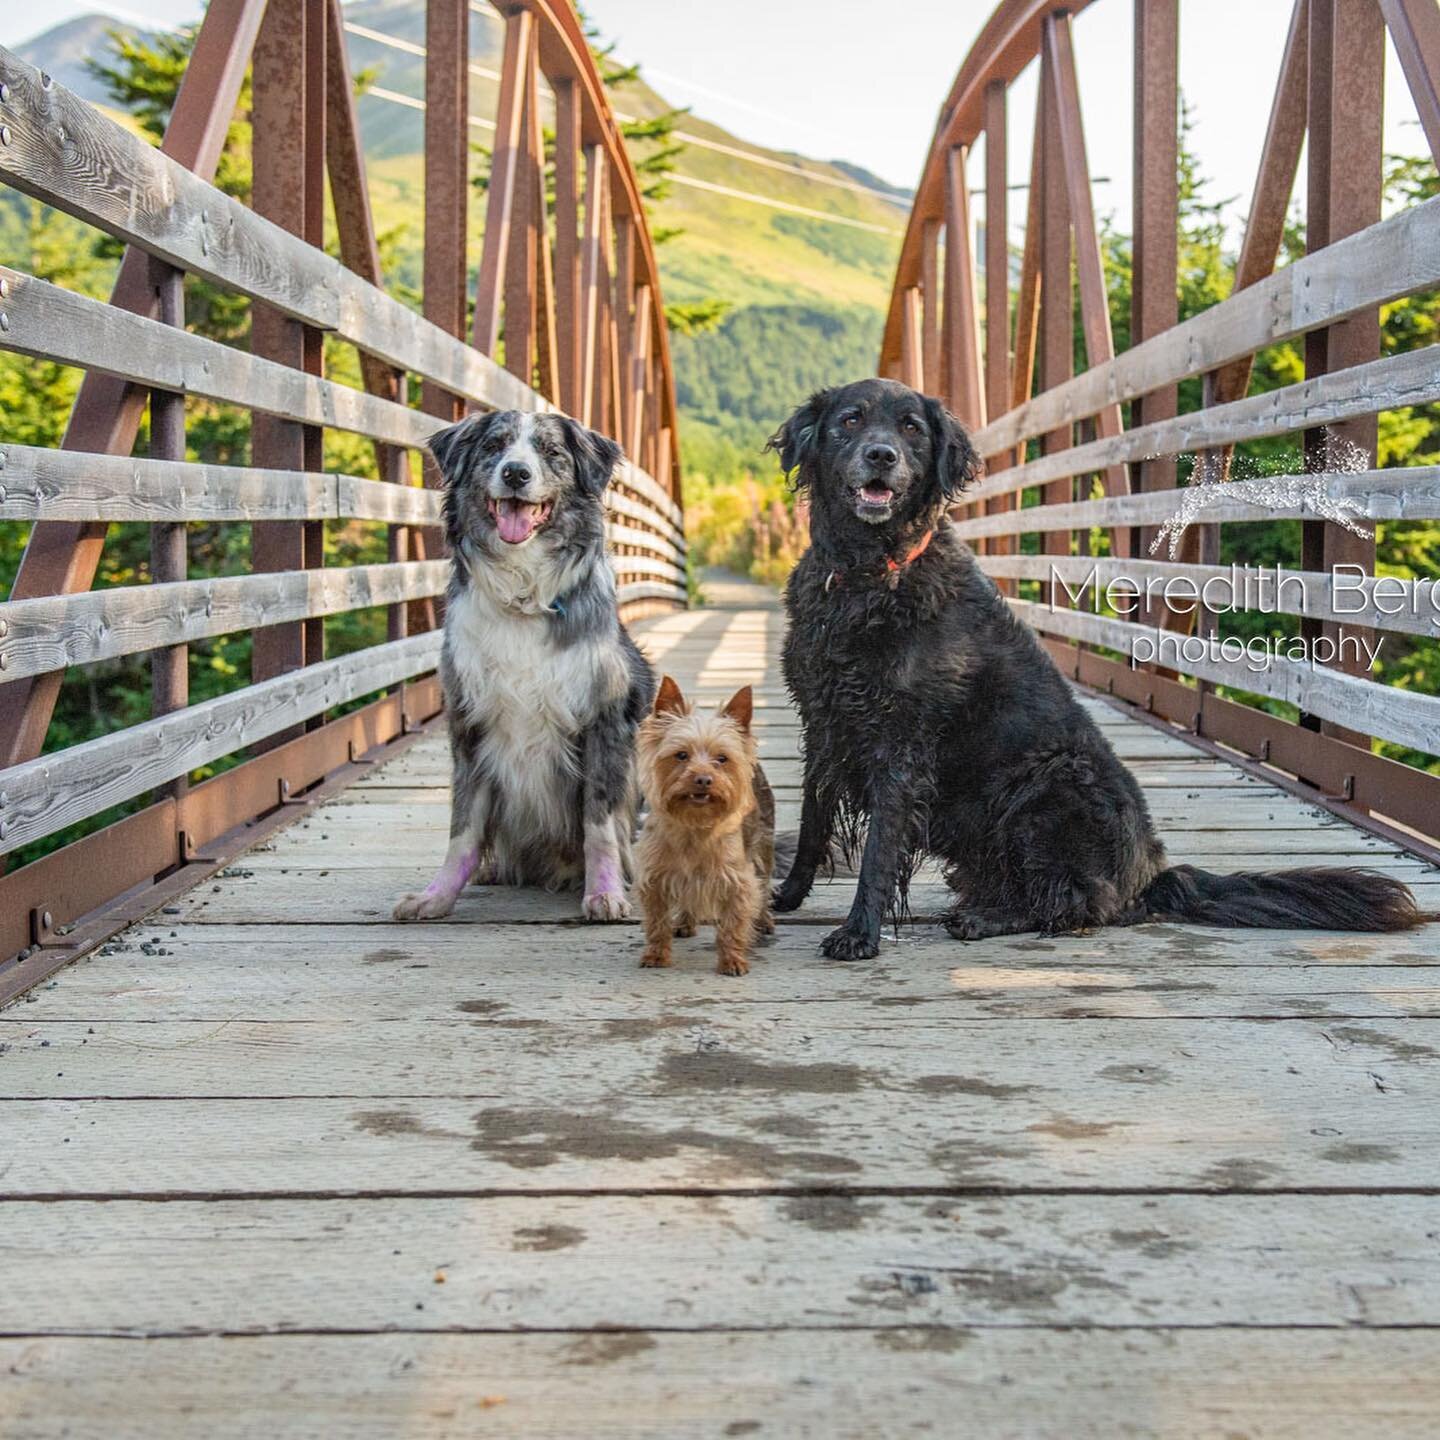 It's #WetDogWednesday and 2 out of 3 of these cute pups just decided to take a quick dip in the river below the bridge we're on! 😂 But they're so sweet, we'll forgive them! These 3 pups are part of the Browning family that I photographed last summer